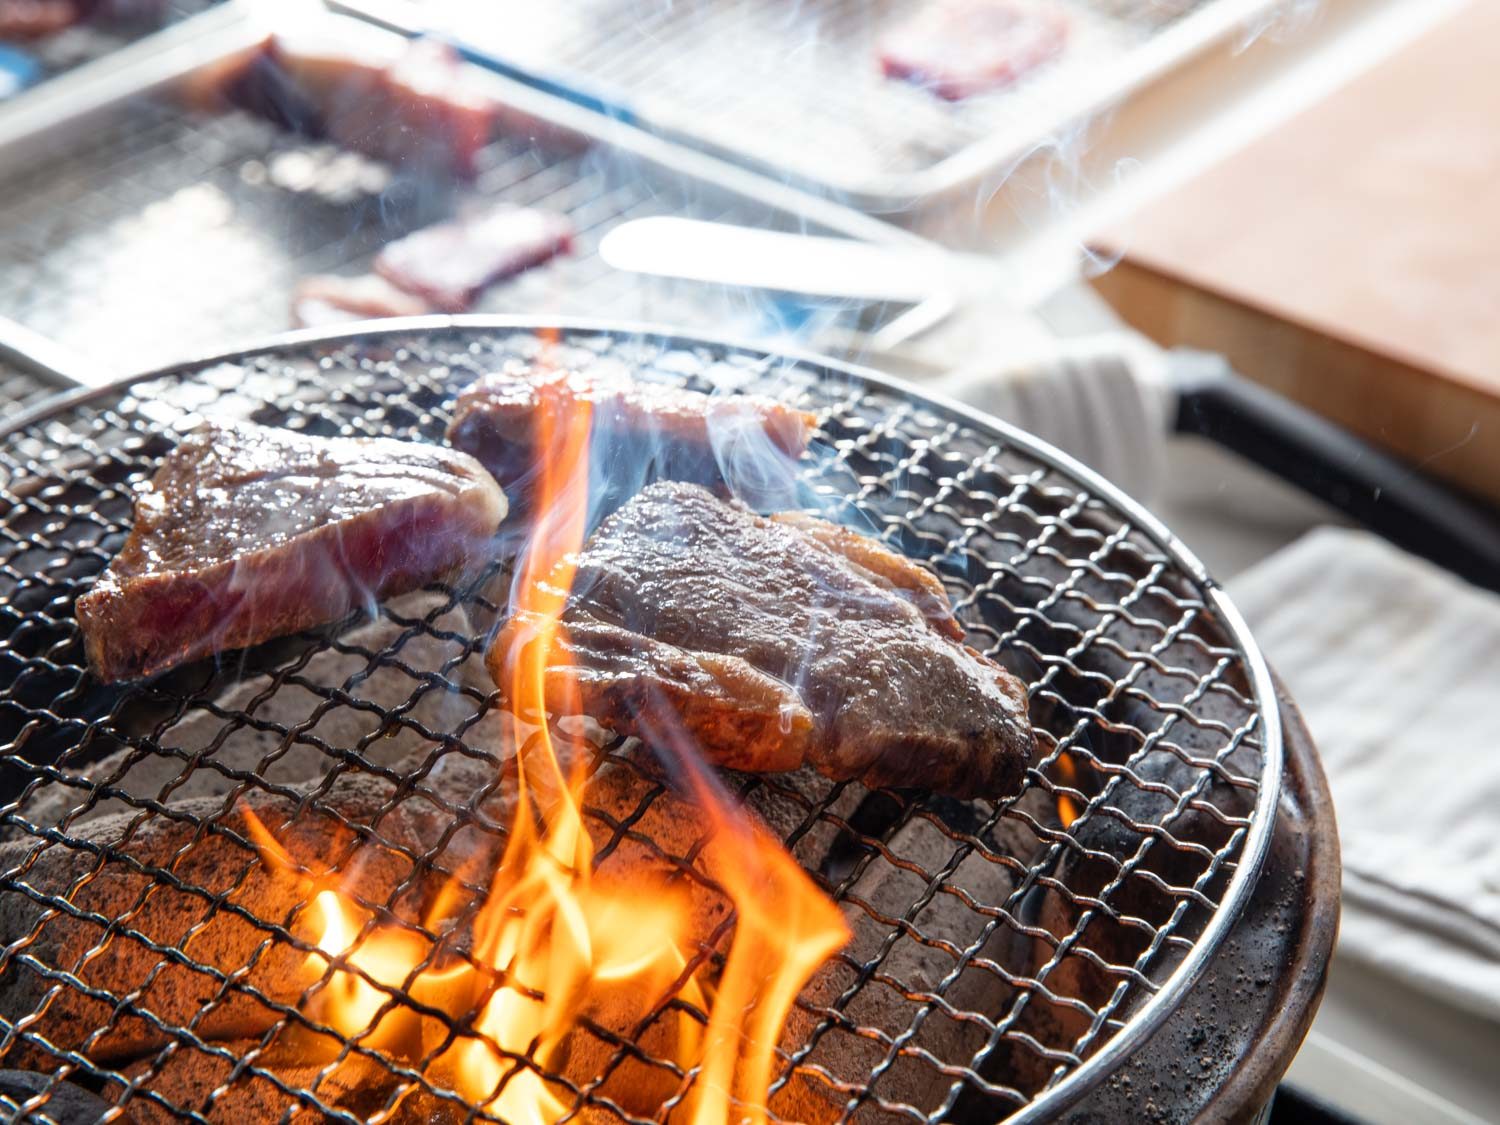 Wagyu steak cooking on a hibachi grill